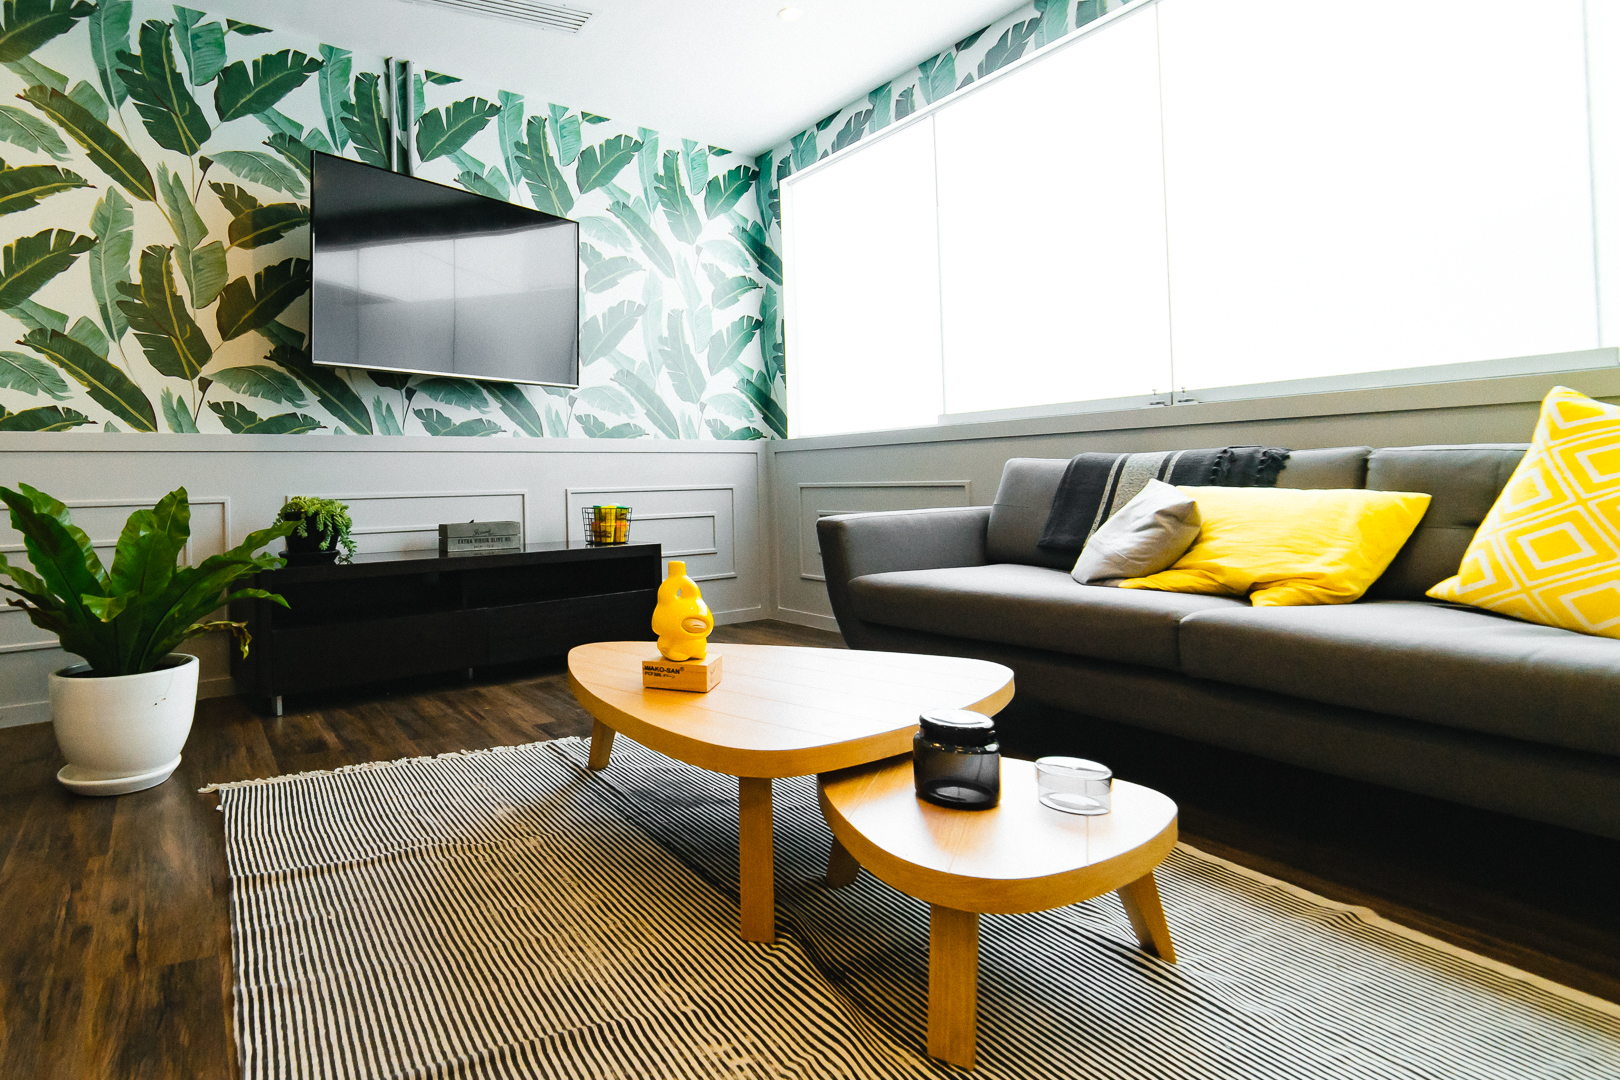 Image of an apartment interior with yellow and green accents